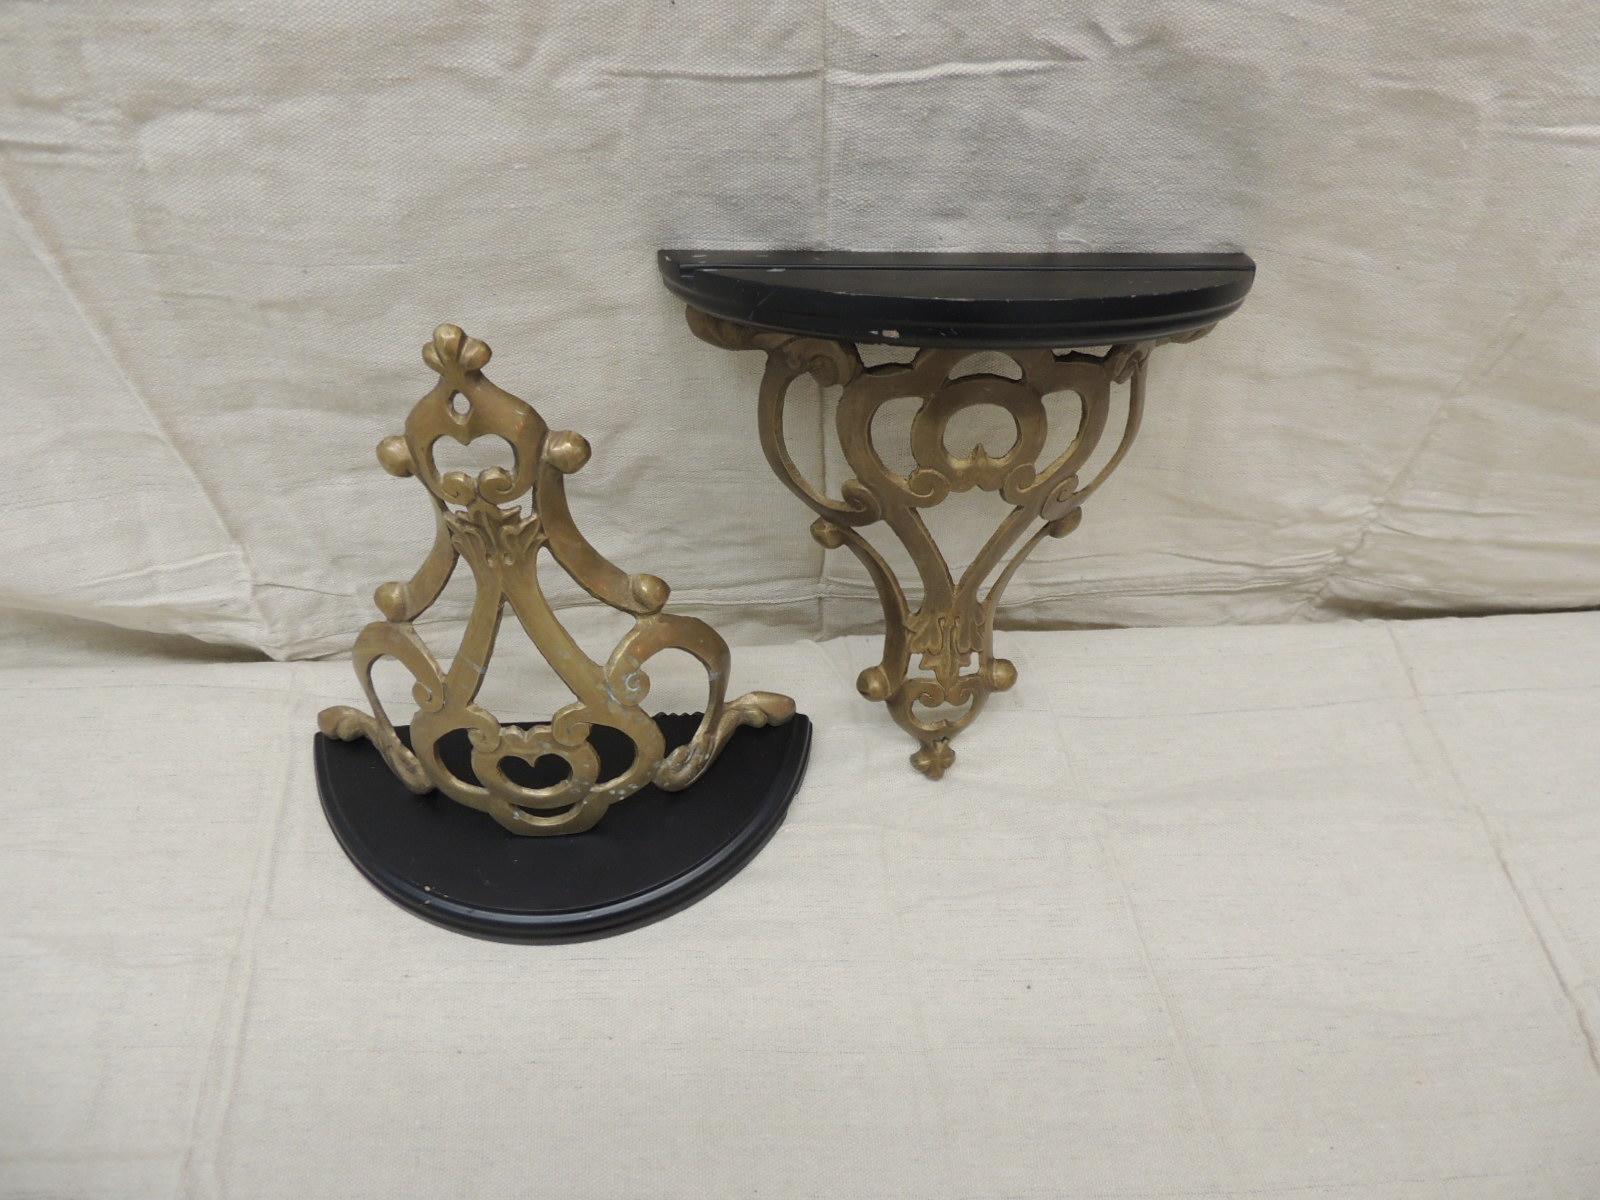 Pair of vintage brass and wood plate holding brackets
demilune shape on the top of the brackets.
Brass motifs underneath
Hanging brackets in the back
Made in India
Size: 9.5